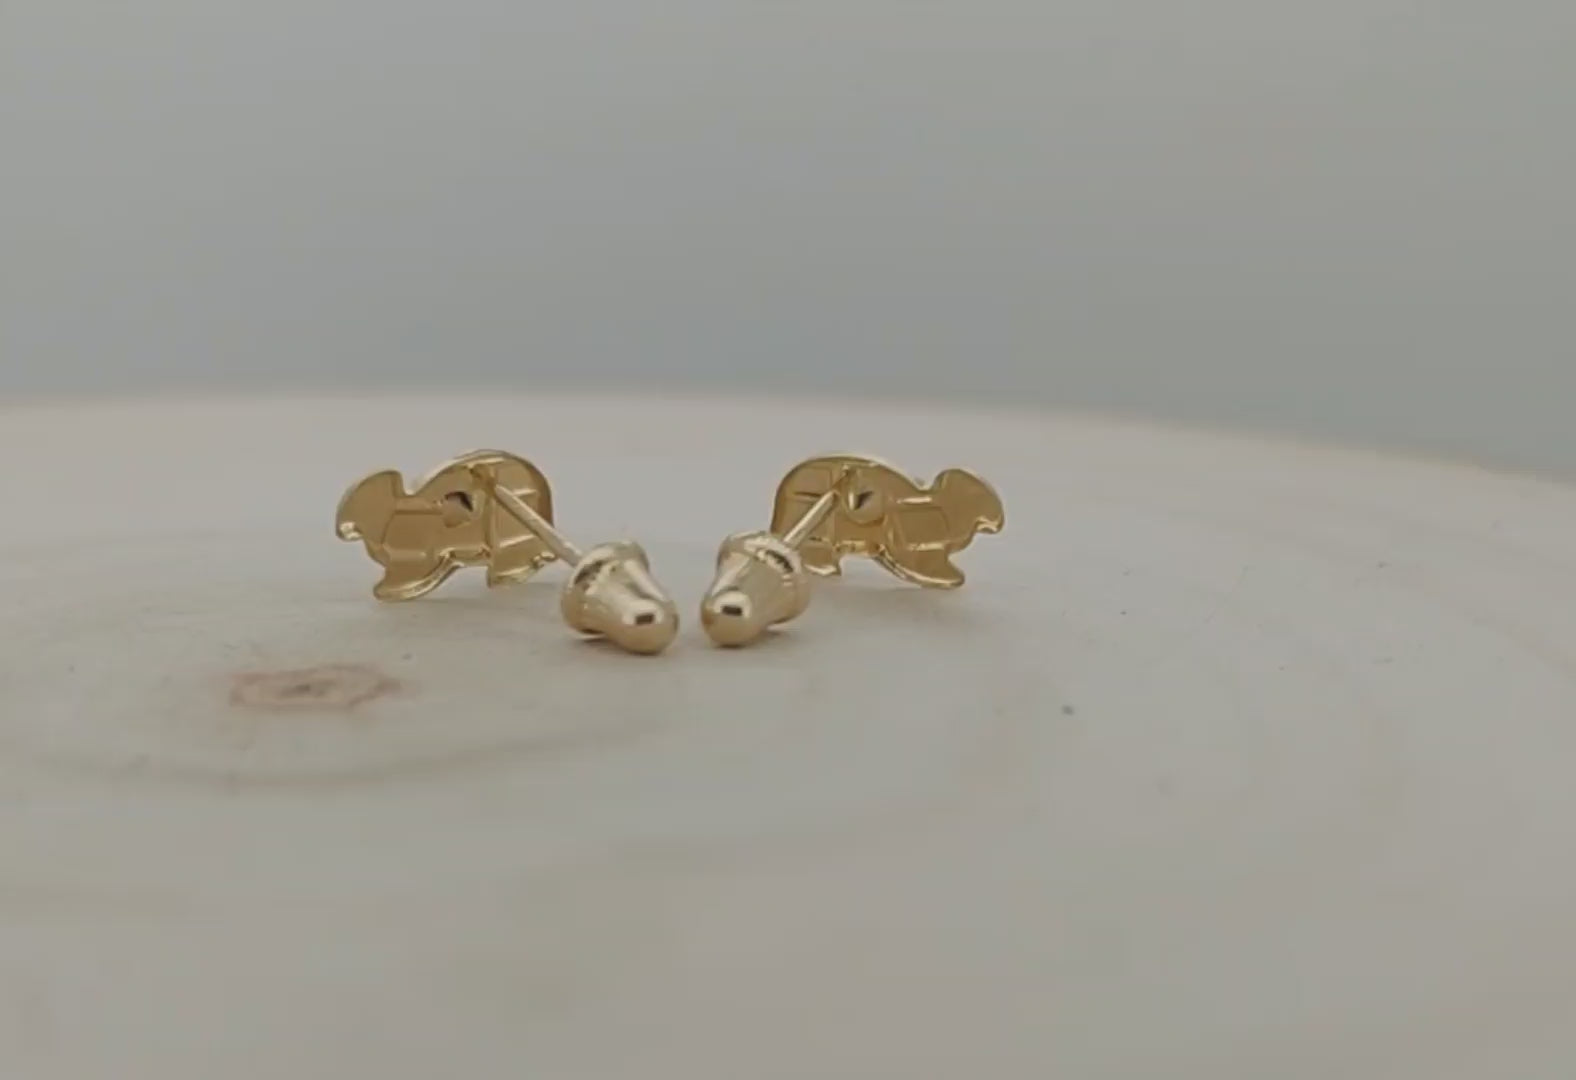 Quality 14k Gold Baby Turtle Earrings - Secured & Stylish | Heart of Jewelry | Los Angeles